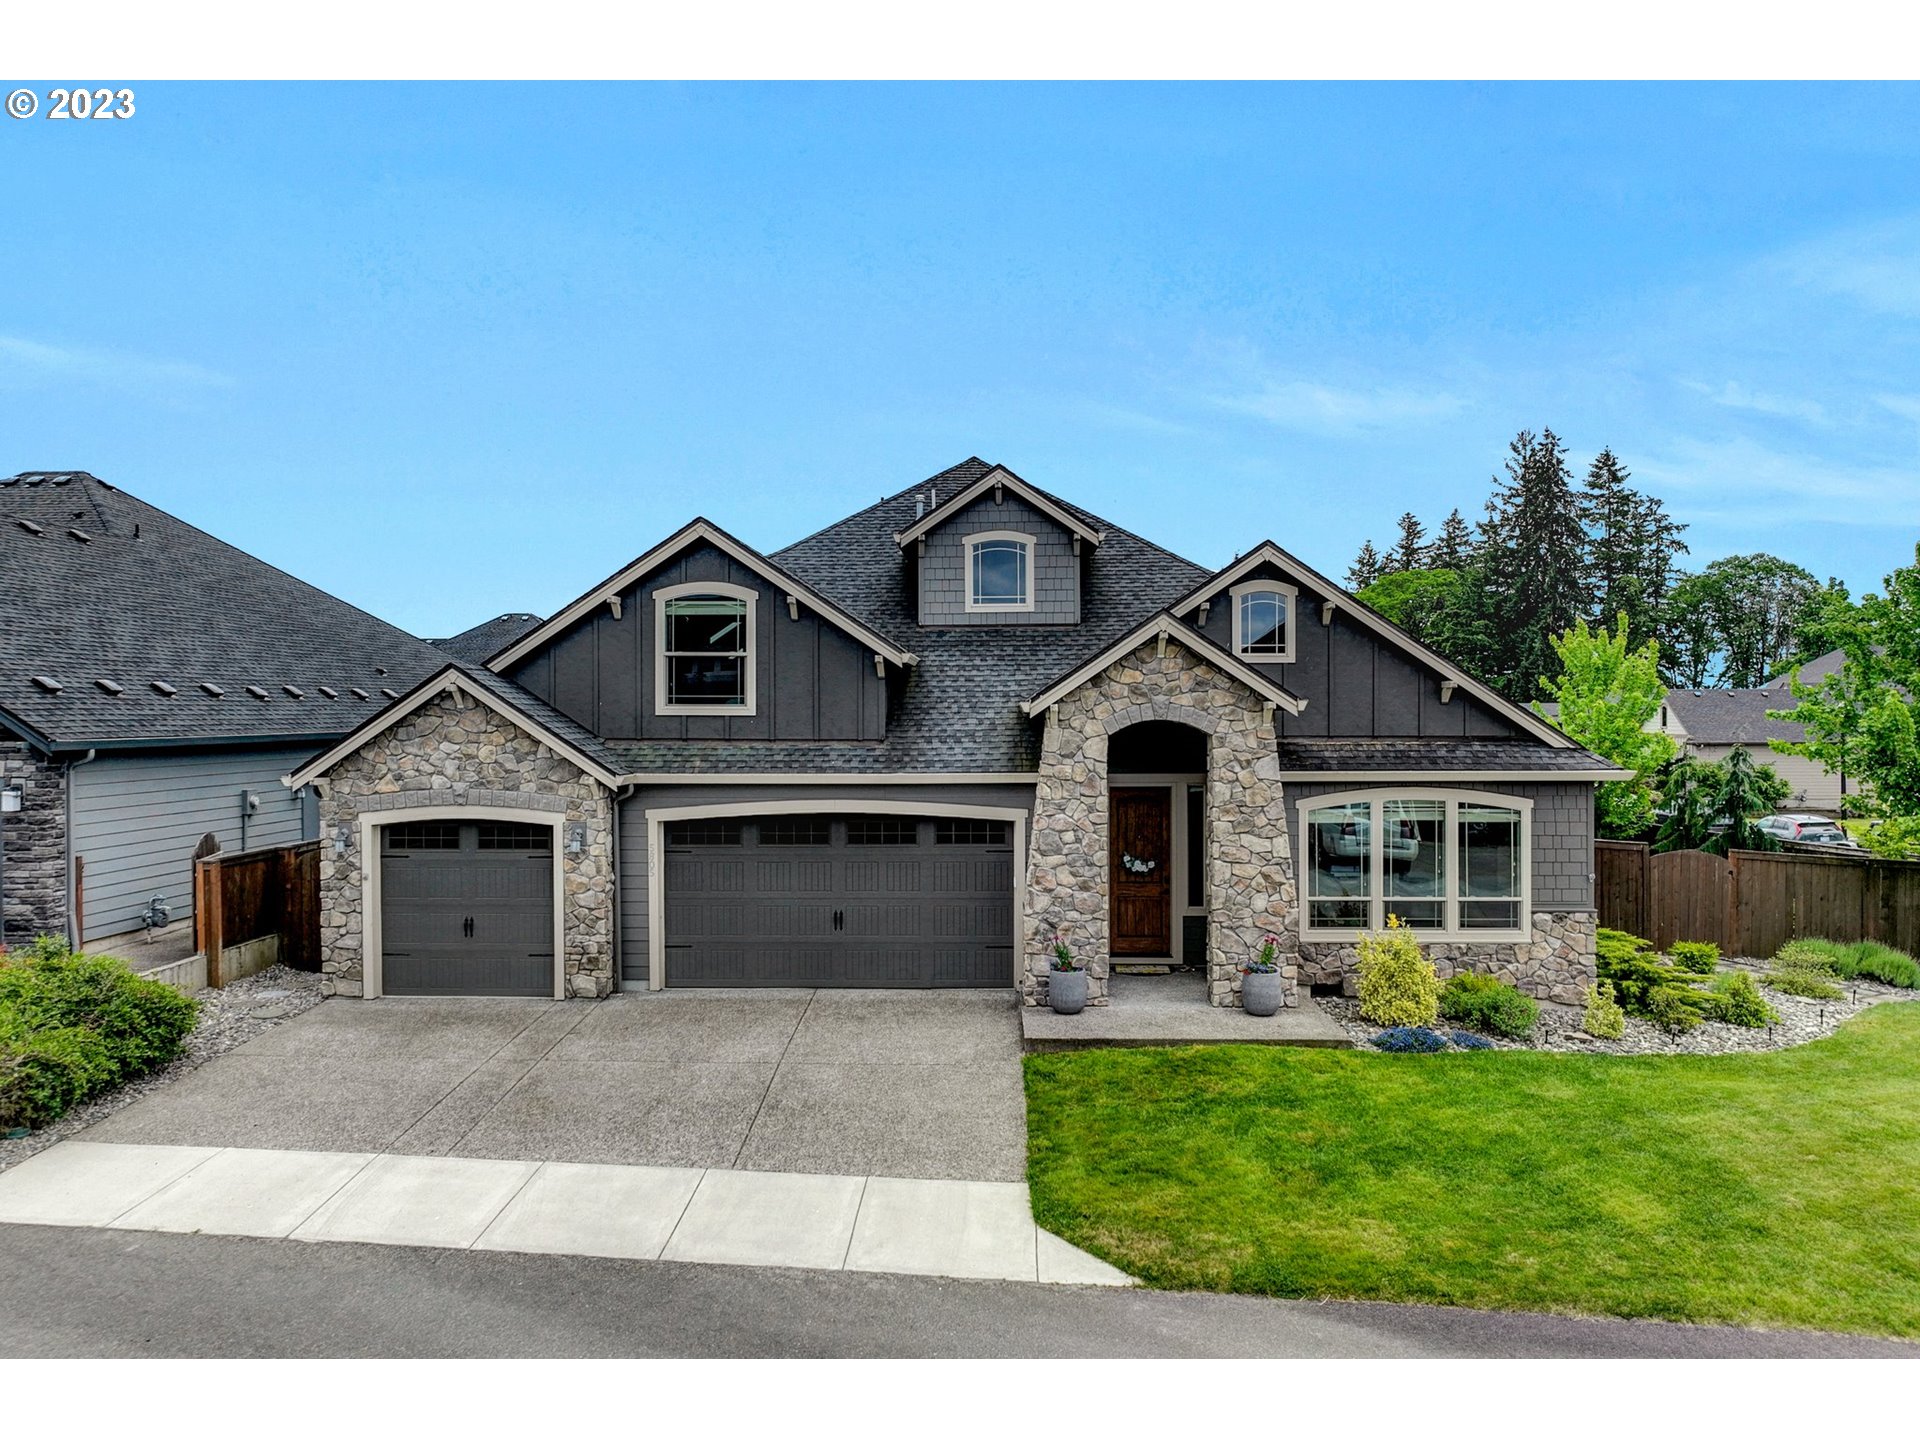 5805 NW 149TH ST, Vancouver, WA 